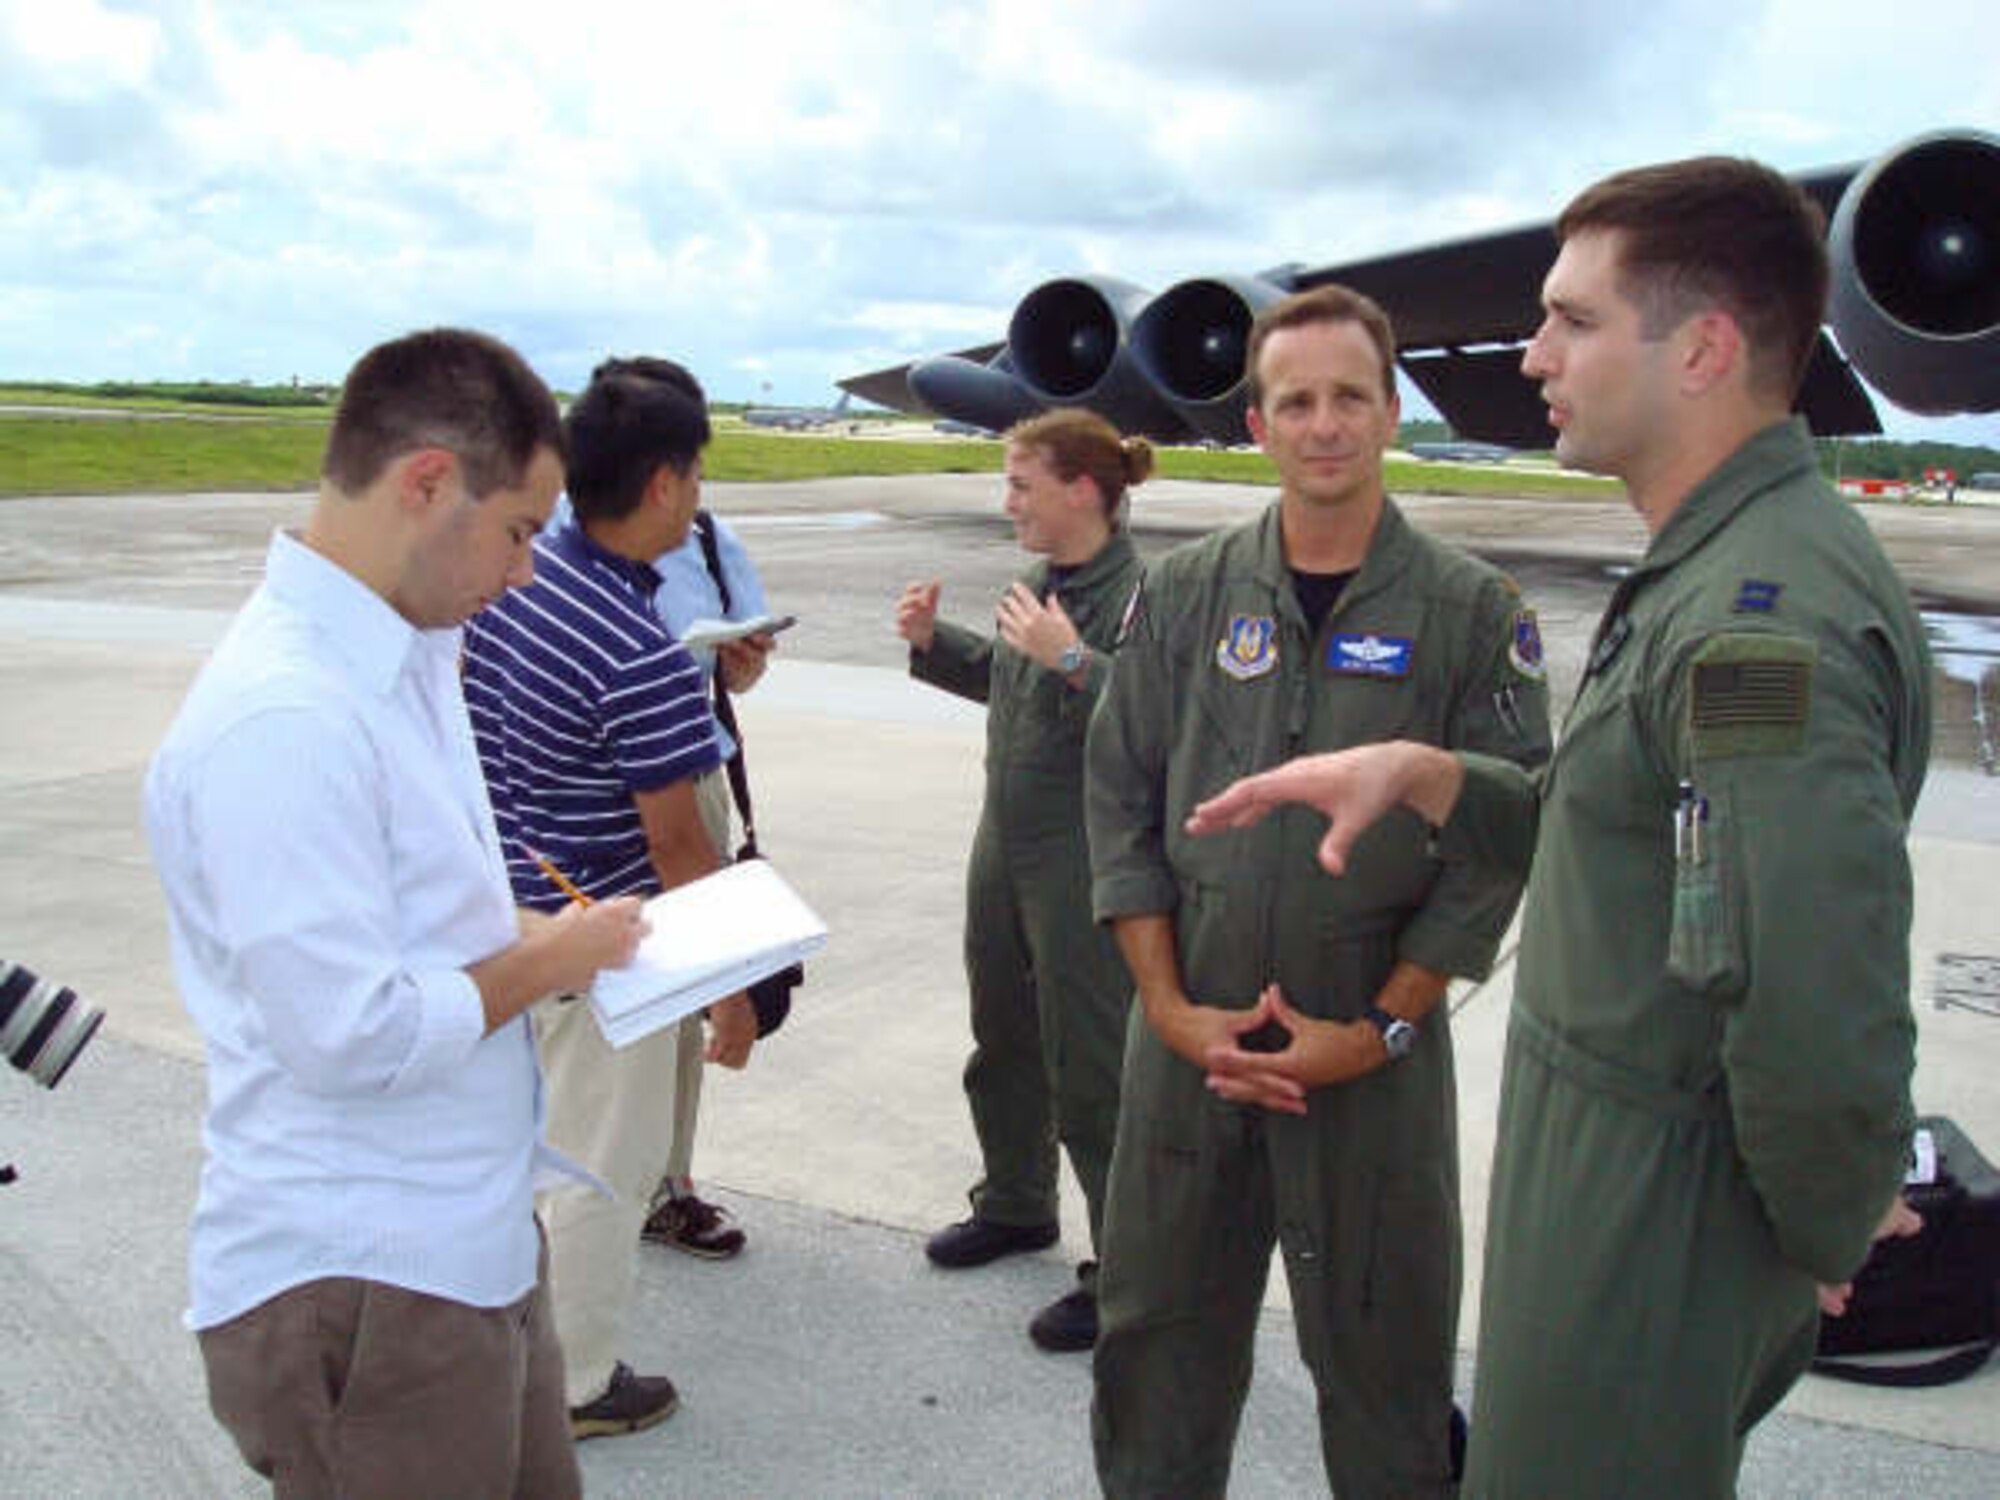 Capt. Matt Baker, a pilot with the 20th Expeditionary Bomb Squadron, explains to Brett Kelman, a reporter for Pacific Daily News, about the support the active duty and reserve crews shared during the Valiant Shield exercise as  Maj. Dennis Heinz, a reservist with the 93rd Bomb Squadron looks on. The two units assigned to Barksdale Air Force Base used Andersen as an operational staging platform during Valiant Shield combining both active duty and Air Force reserve assets. (U.S. Air Force photo by Master Sgt. Art Webb)